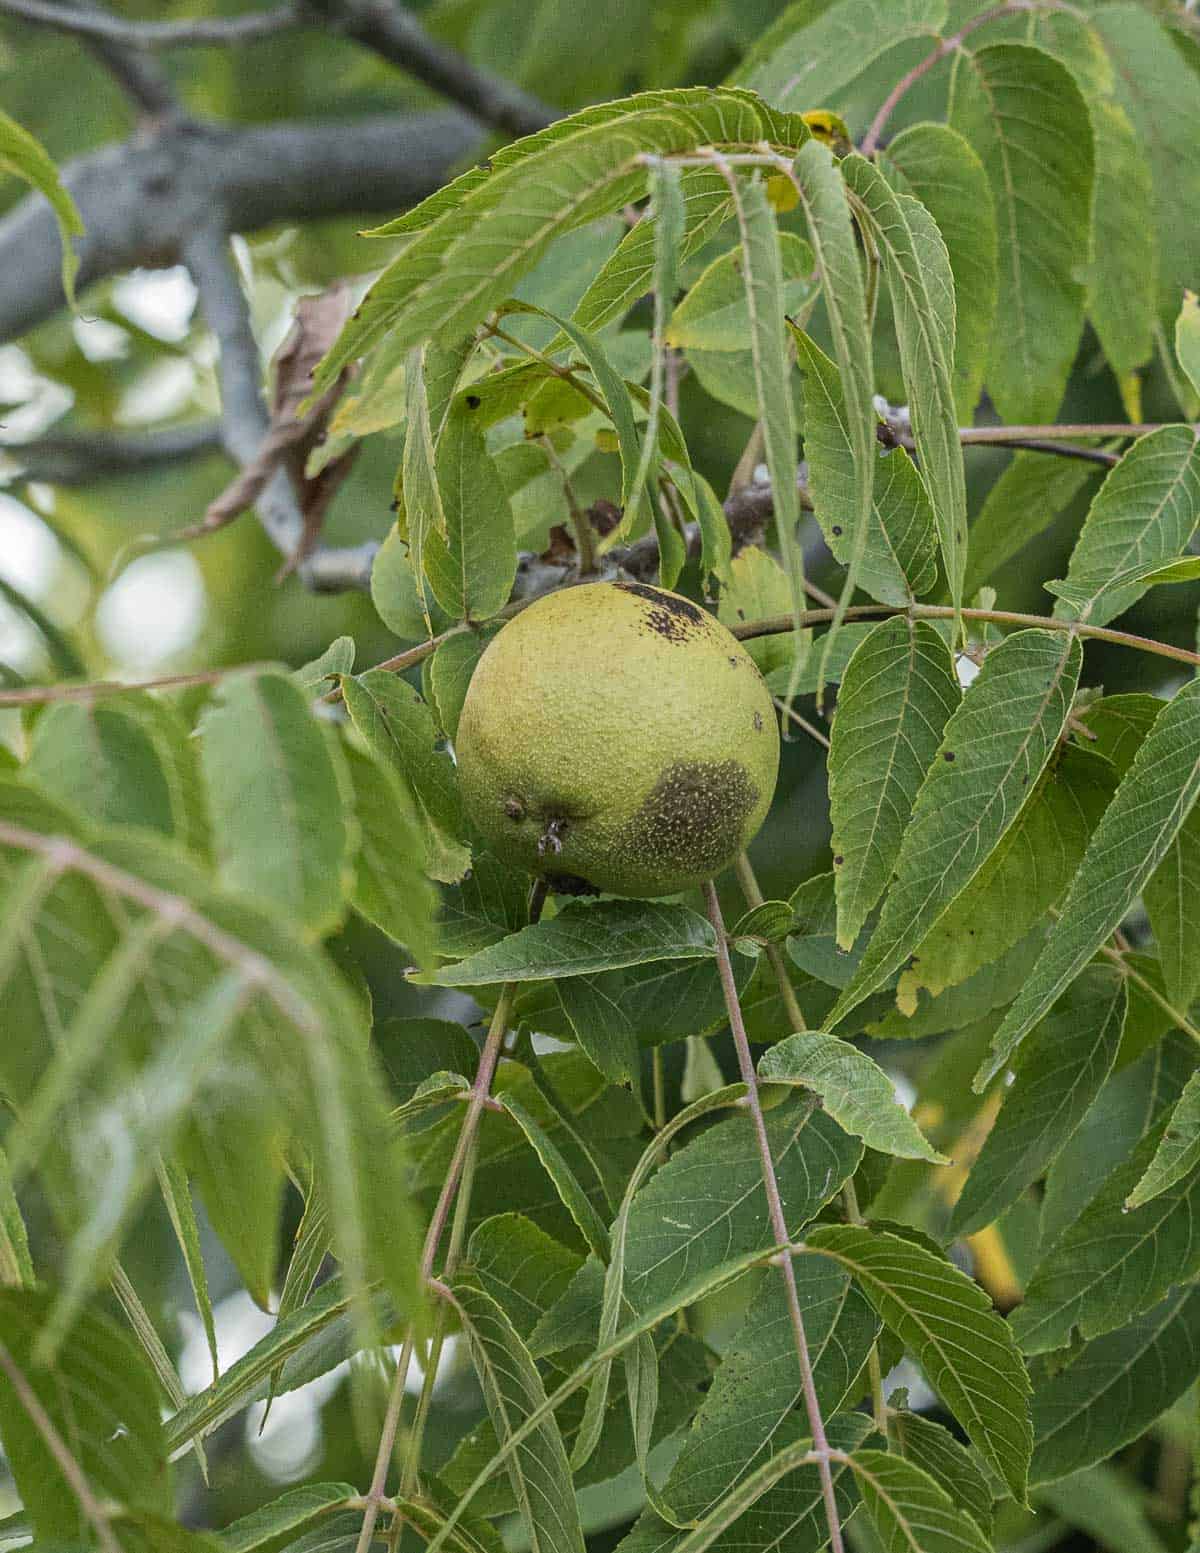 A black walnut showing discoloration of the hull meaning it's ready to harvest.  